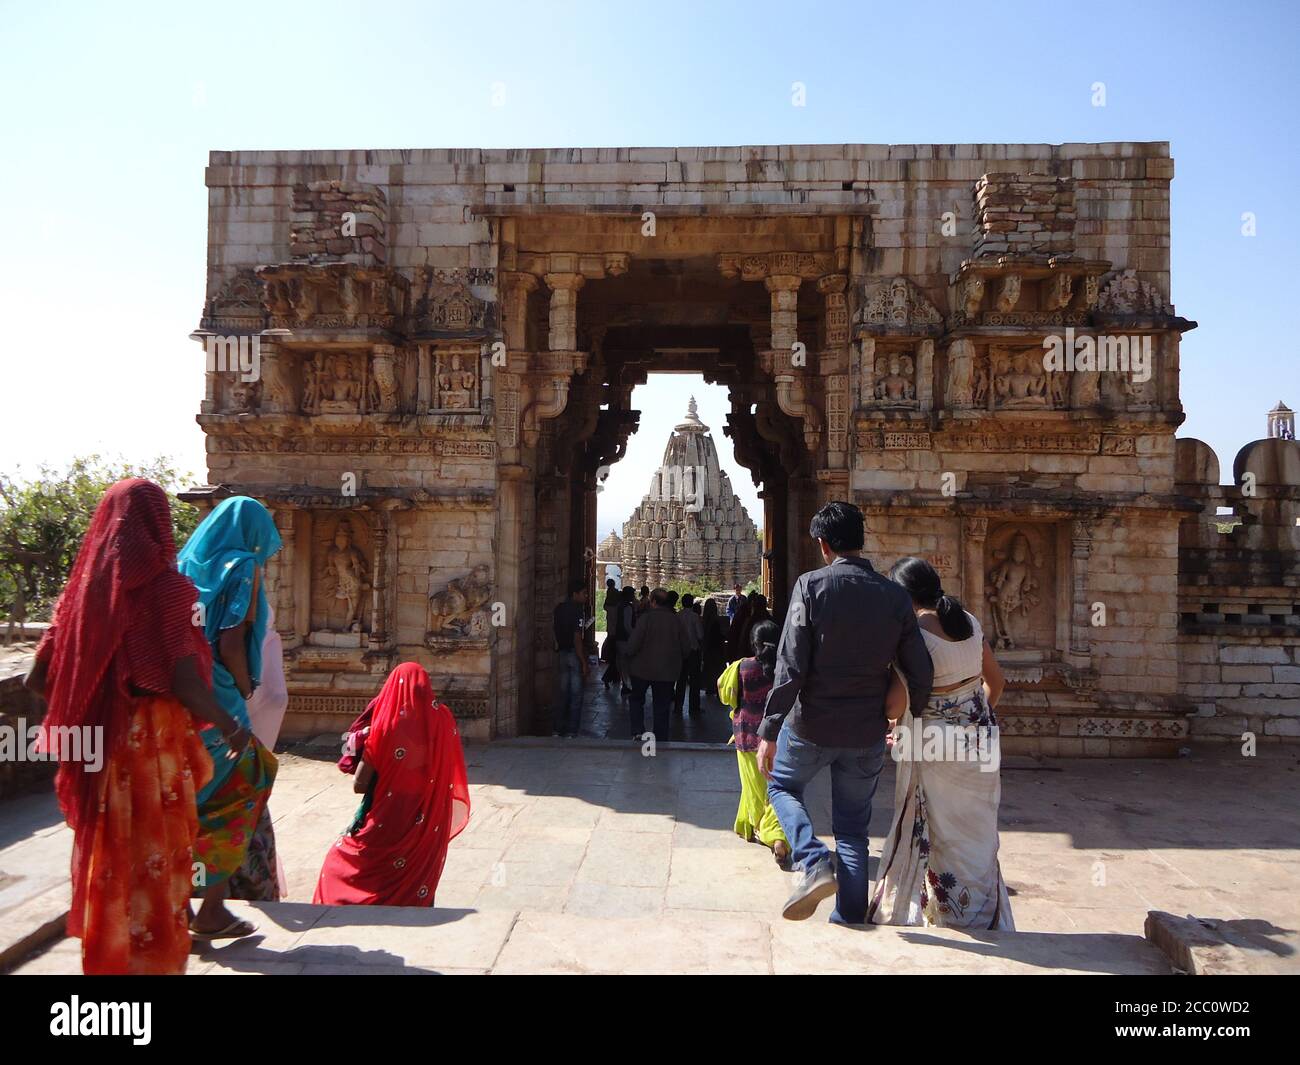 people visitng at The Bhagwan Parshvanath Temple of chittorgarh fort Stock Photo